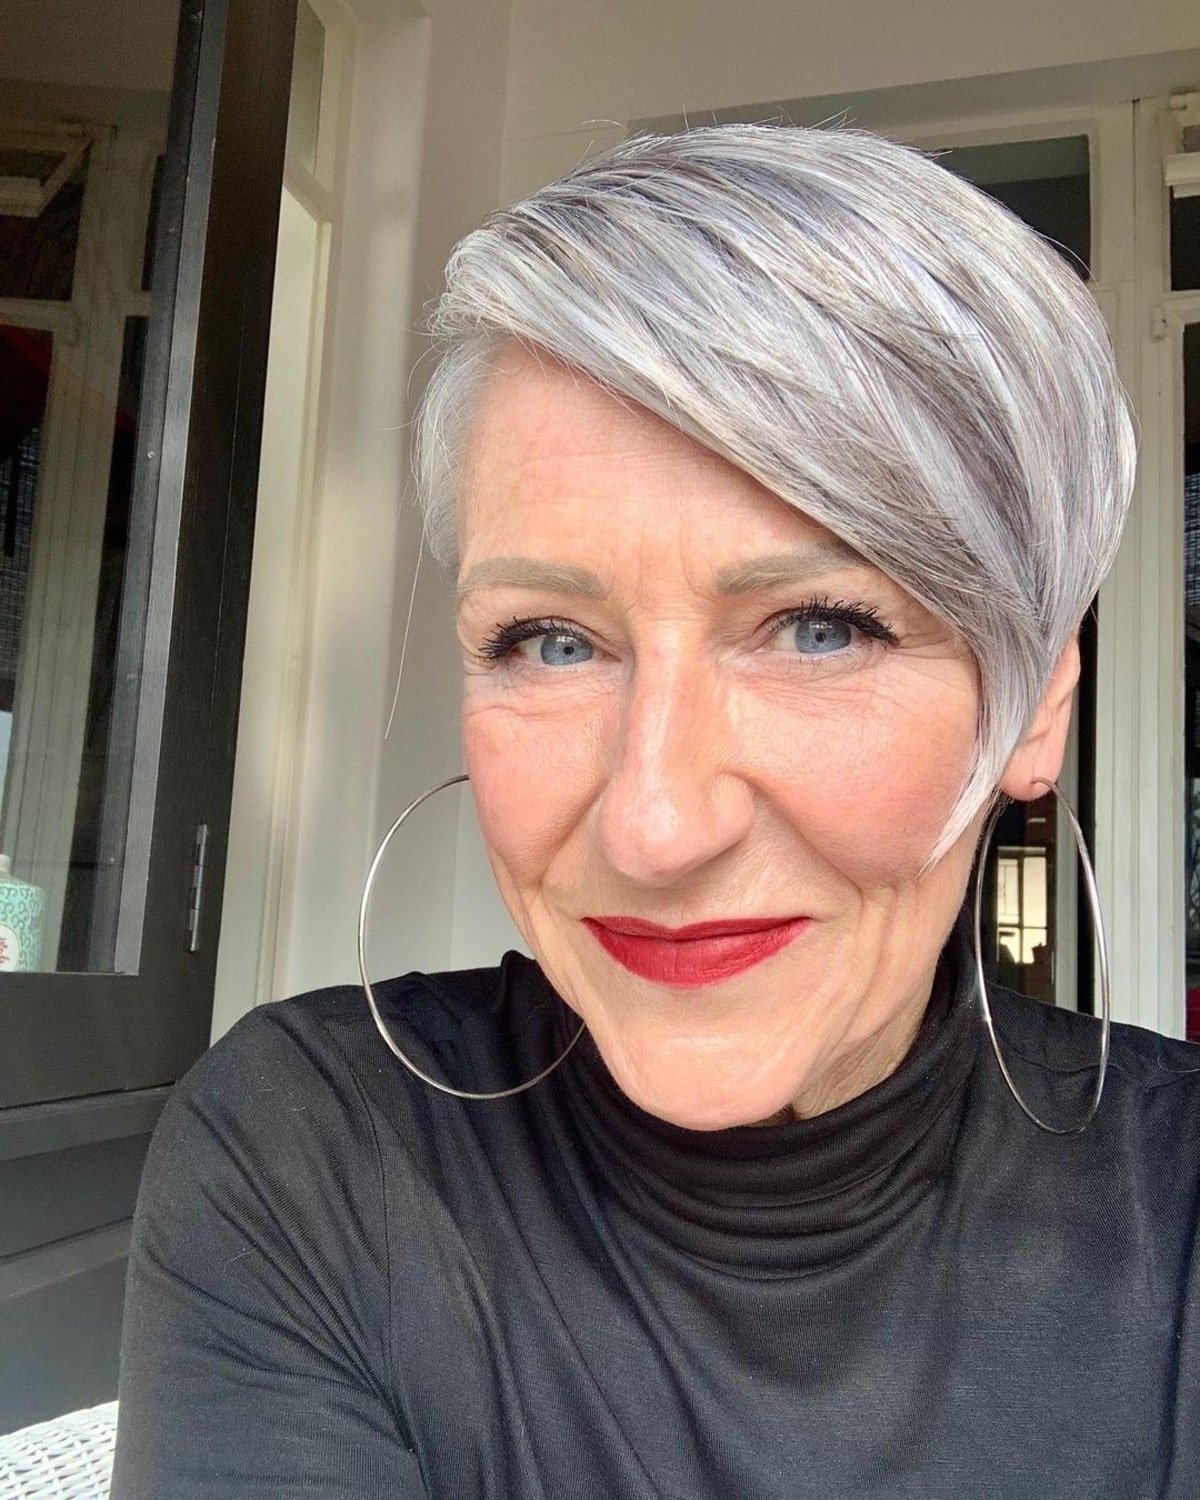 Salt-and-pepper pixie for women over 70